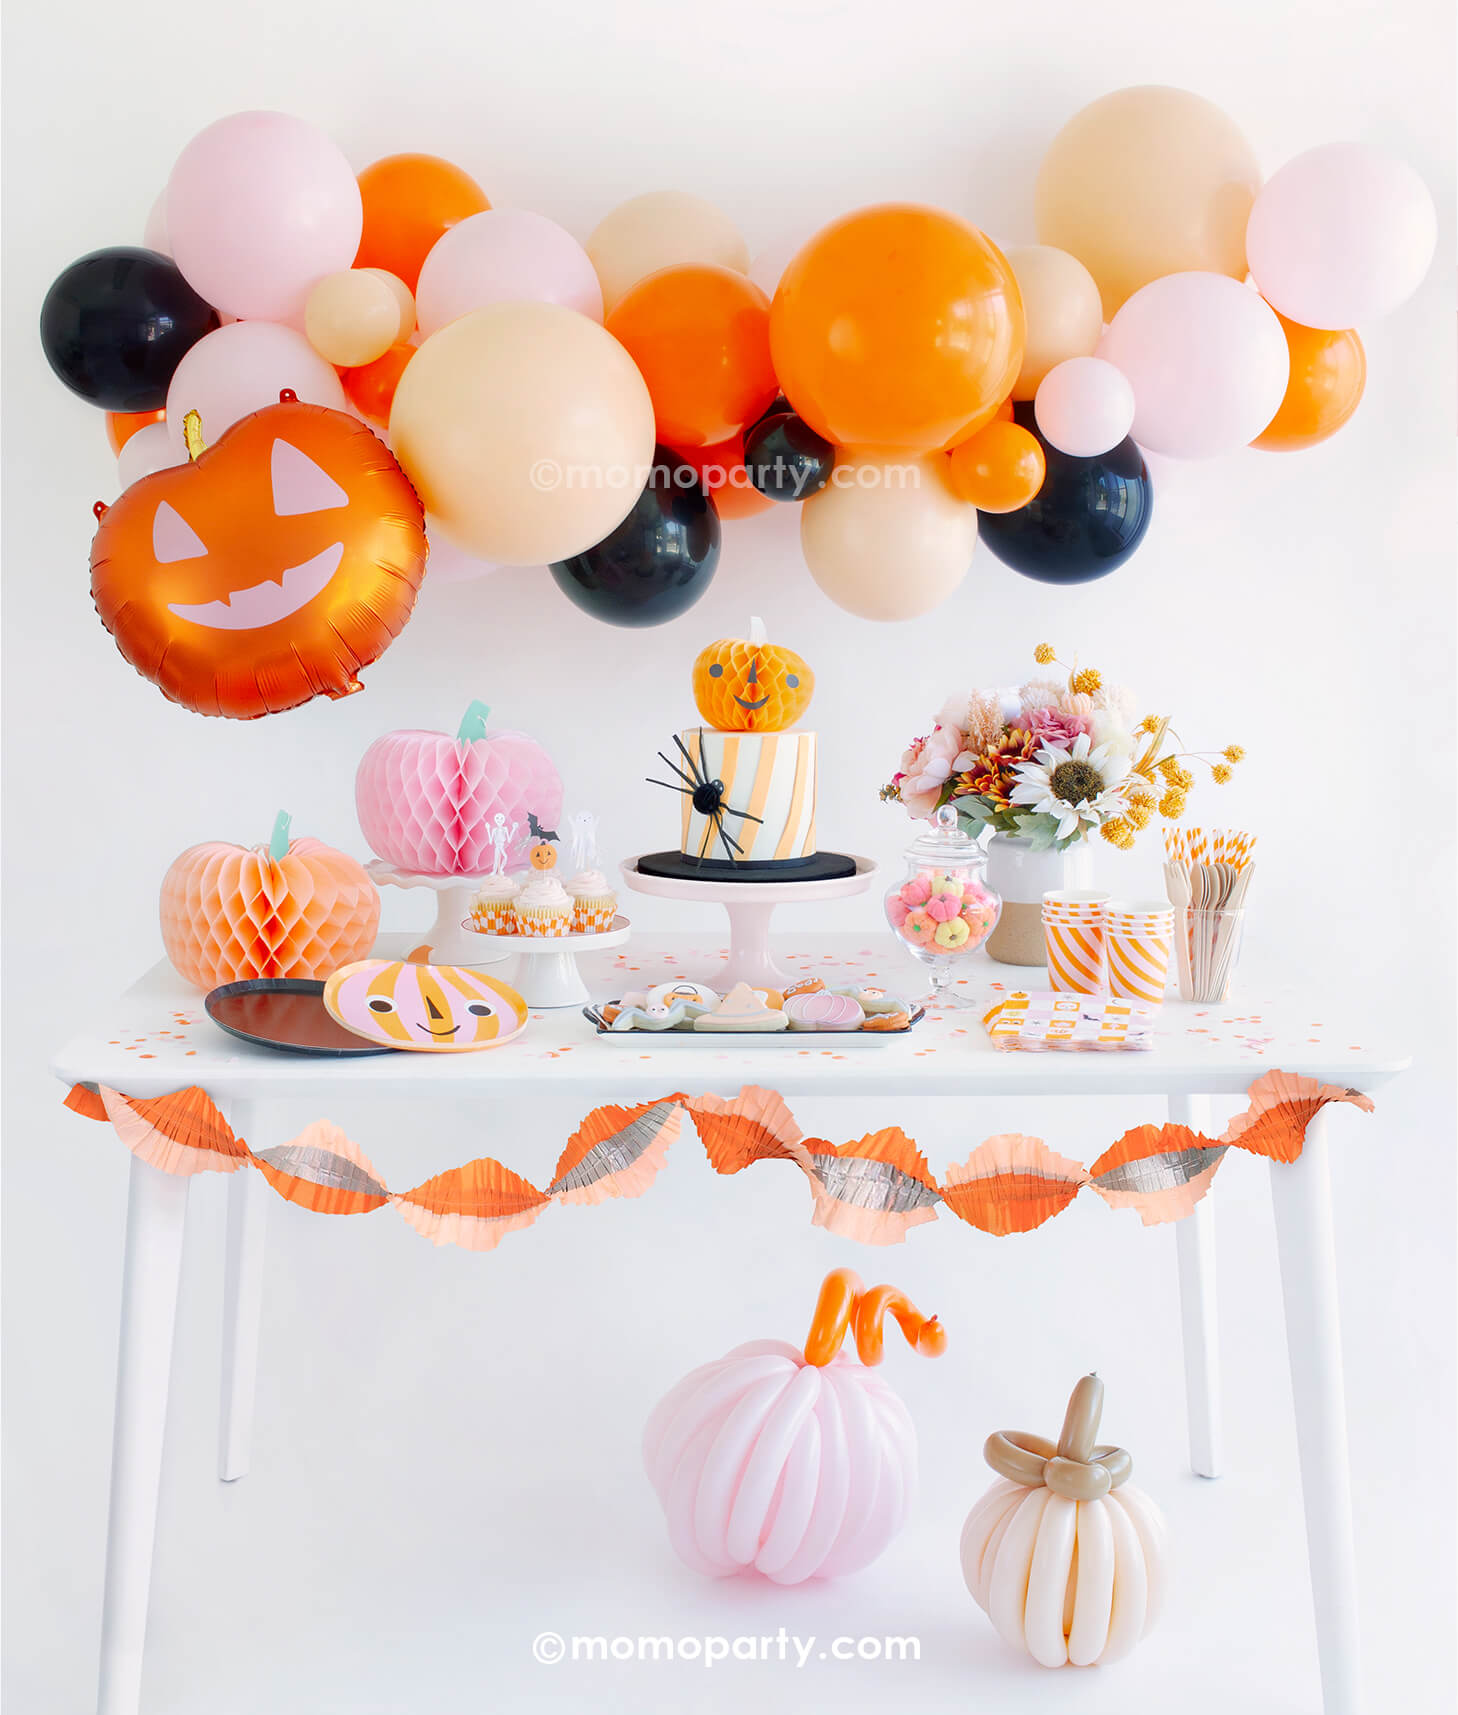 Momo Party's "Hey Pumpkin" Halloween party box featuring adorable pumpkin themed party supplies including a boo-tiful balloon garland in orange, pink, blush and black colors, smiley pumpkin shaped plates, groovy Halloween checkered napkins, honeycomb pumpkin decorations in pink and peach colors, with the pink and orange crepe streamer hung around the table and two boho colored pumpkin made with twisting balloons, this party look is perfect for a girly, kid's friendly pink Halloween bash this season! 